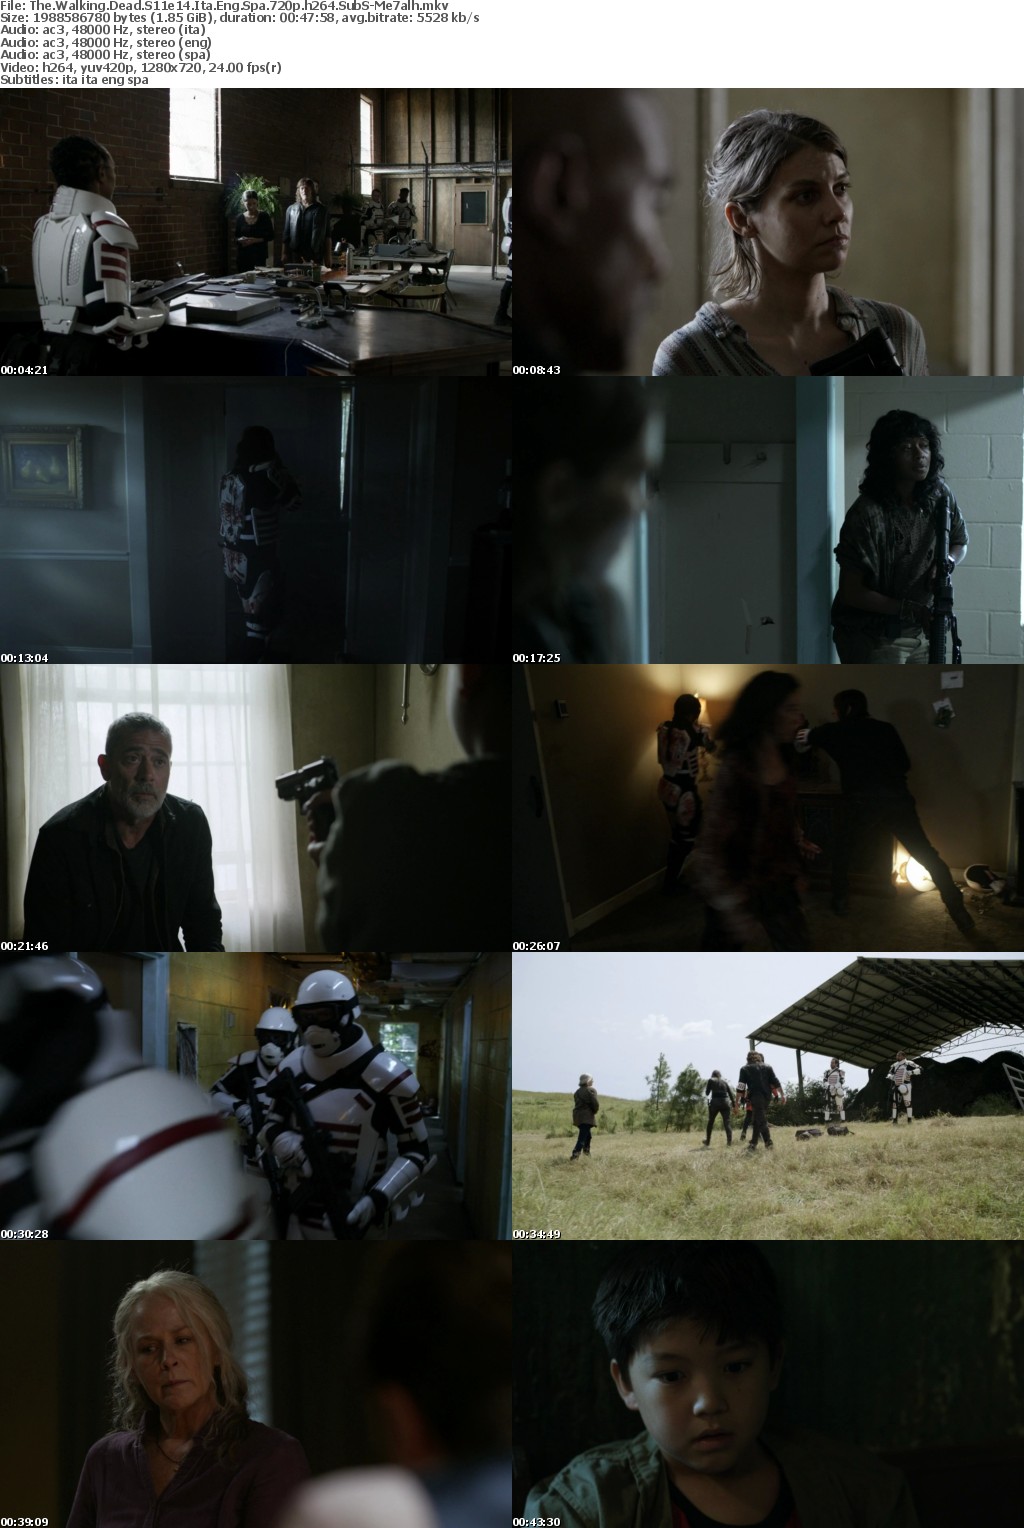 The Walking Dead S11e14 720p Ita Eng Spa SubS MirCrewRelease byMe7alh